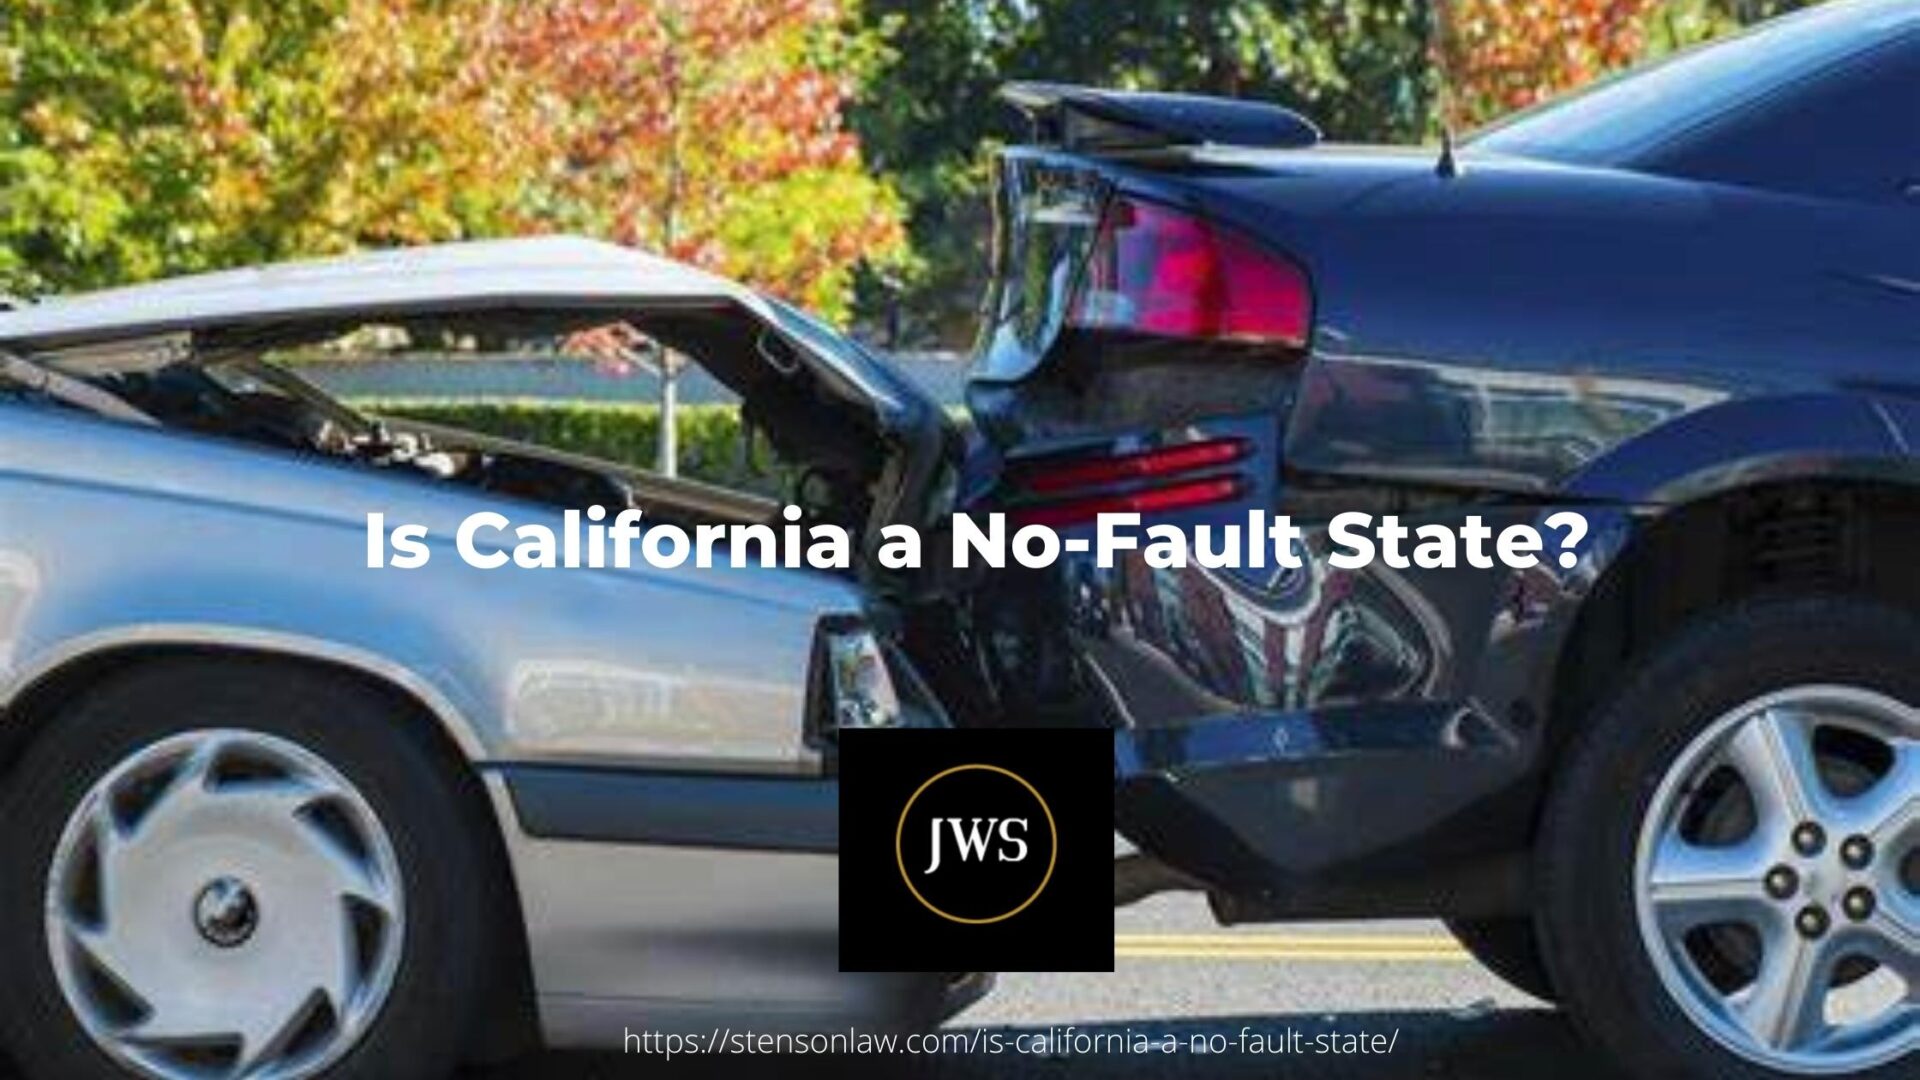 Is California a No-fault state?